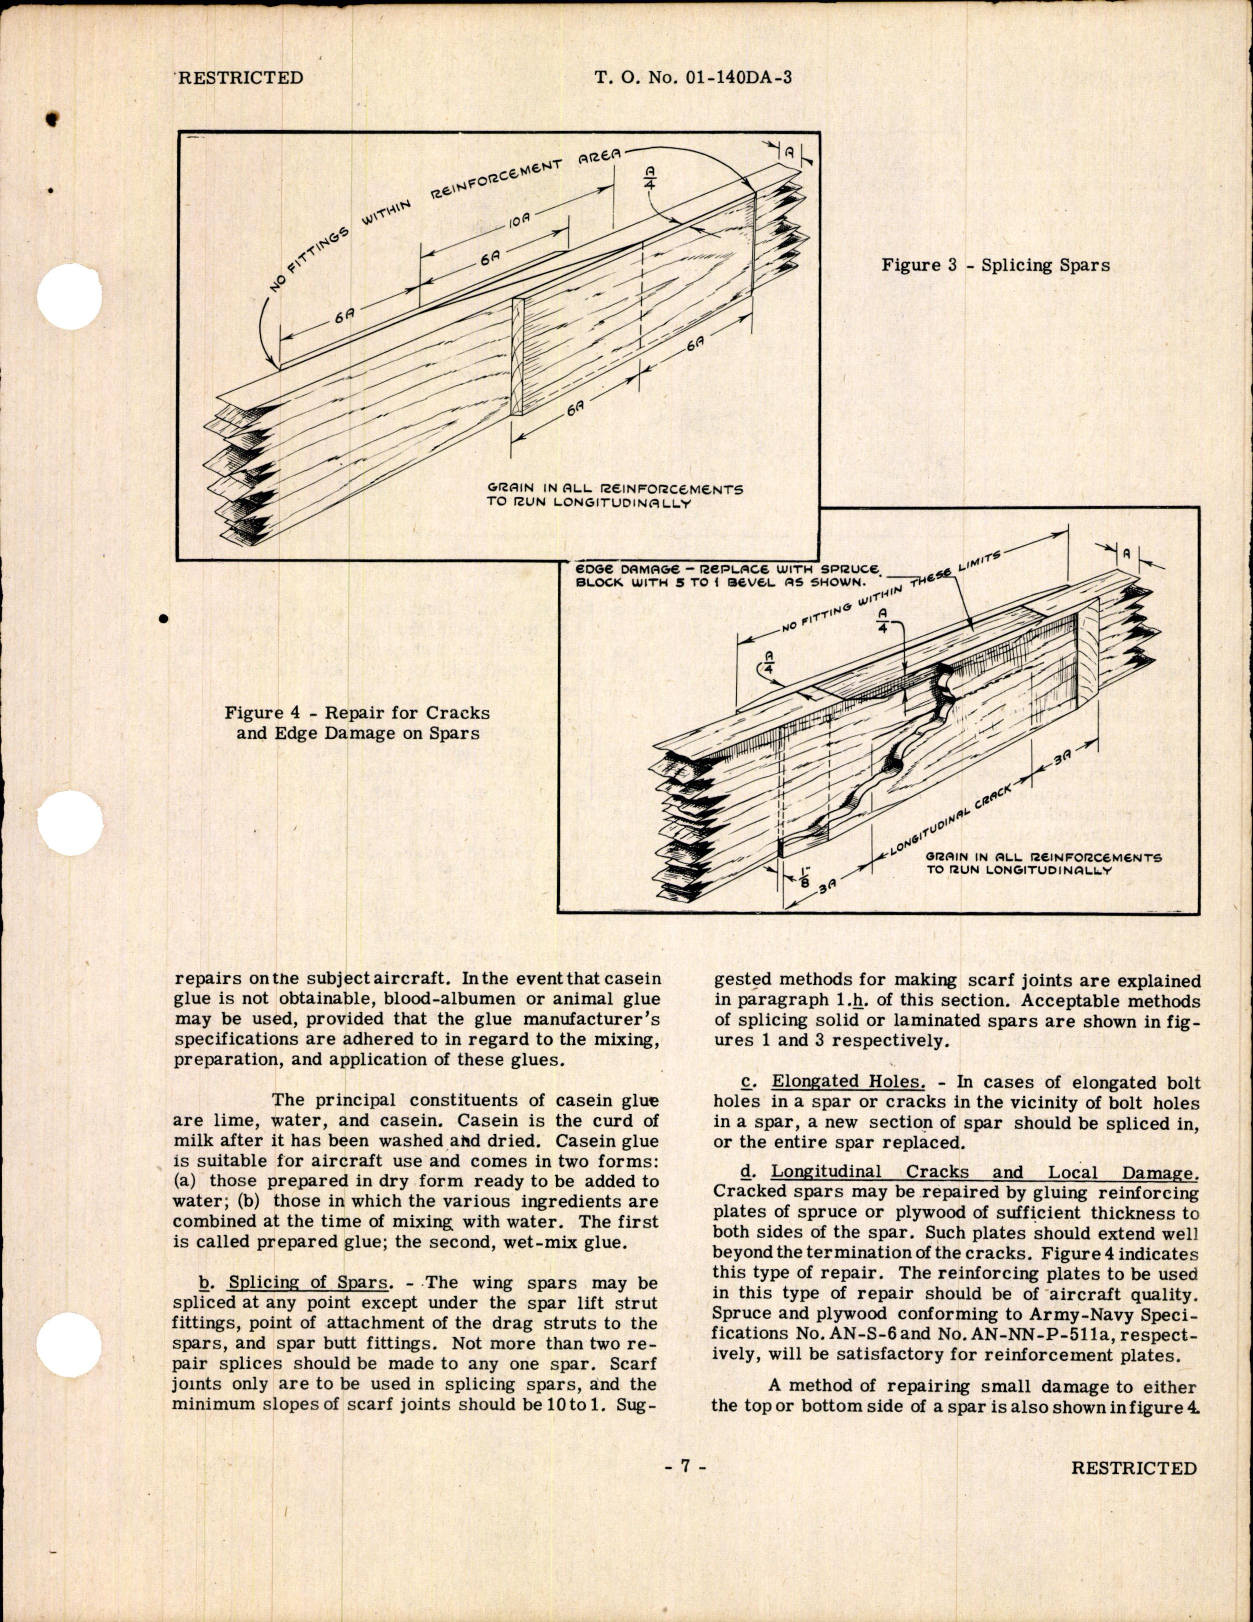 Sample page 9 from AirCorps Library document: Handbook of Instructions for the Structural Repair of the L-4 Series